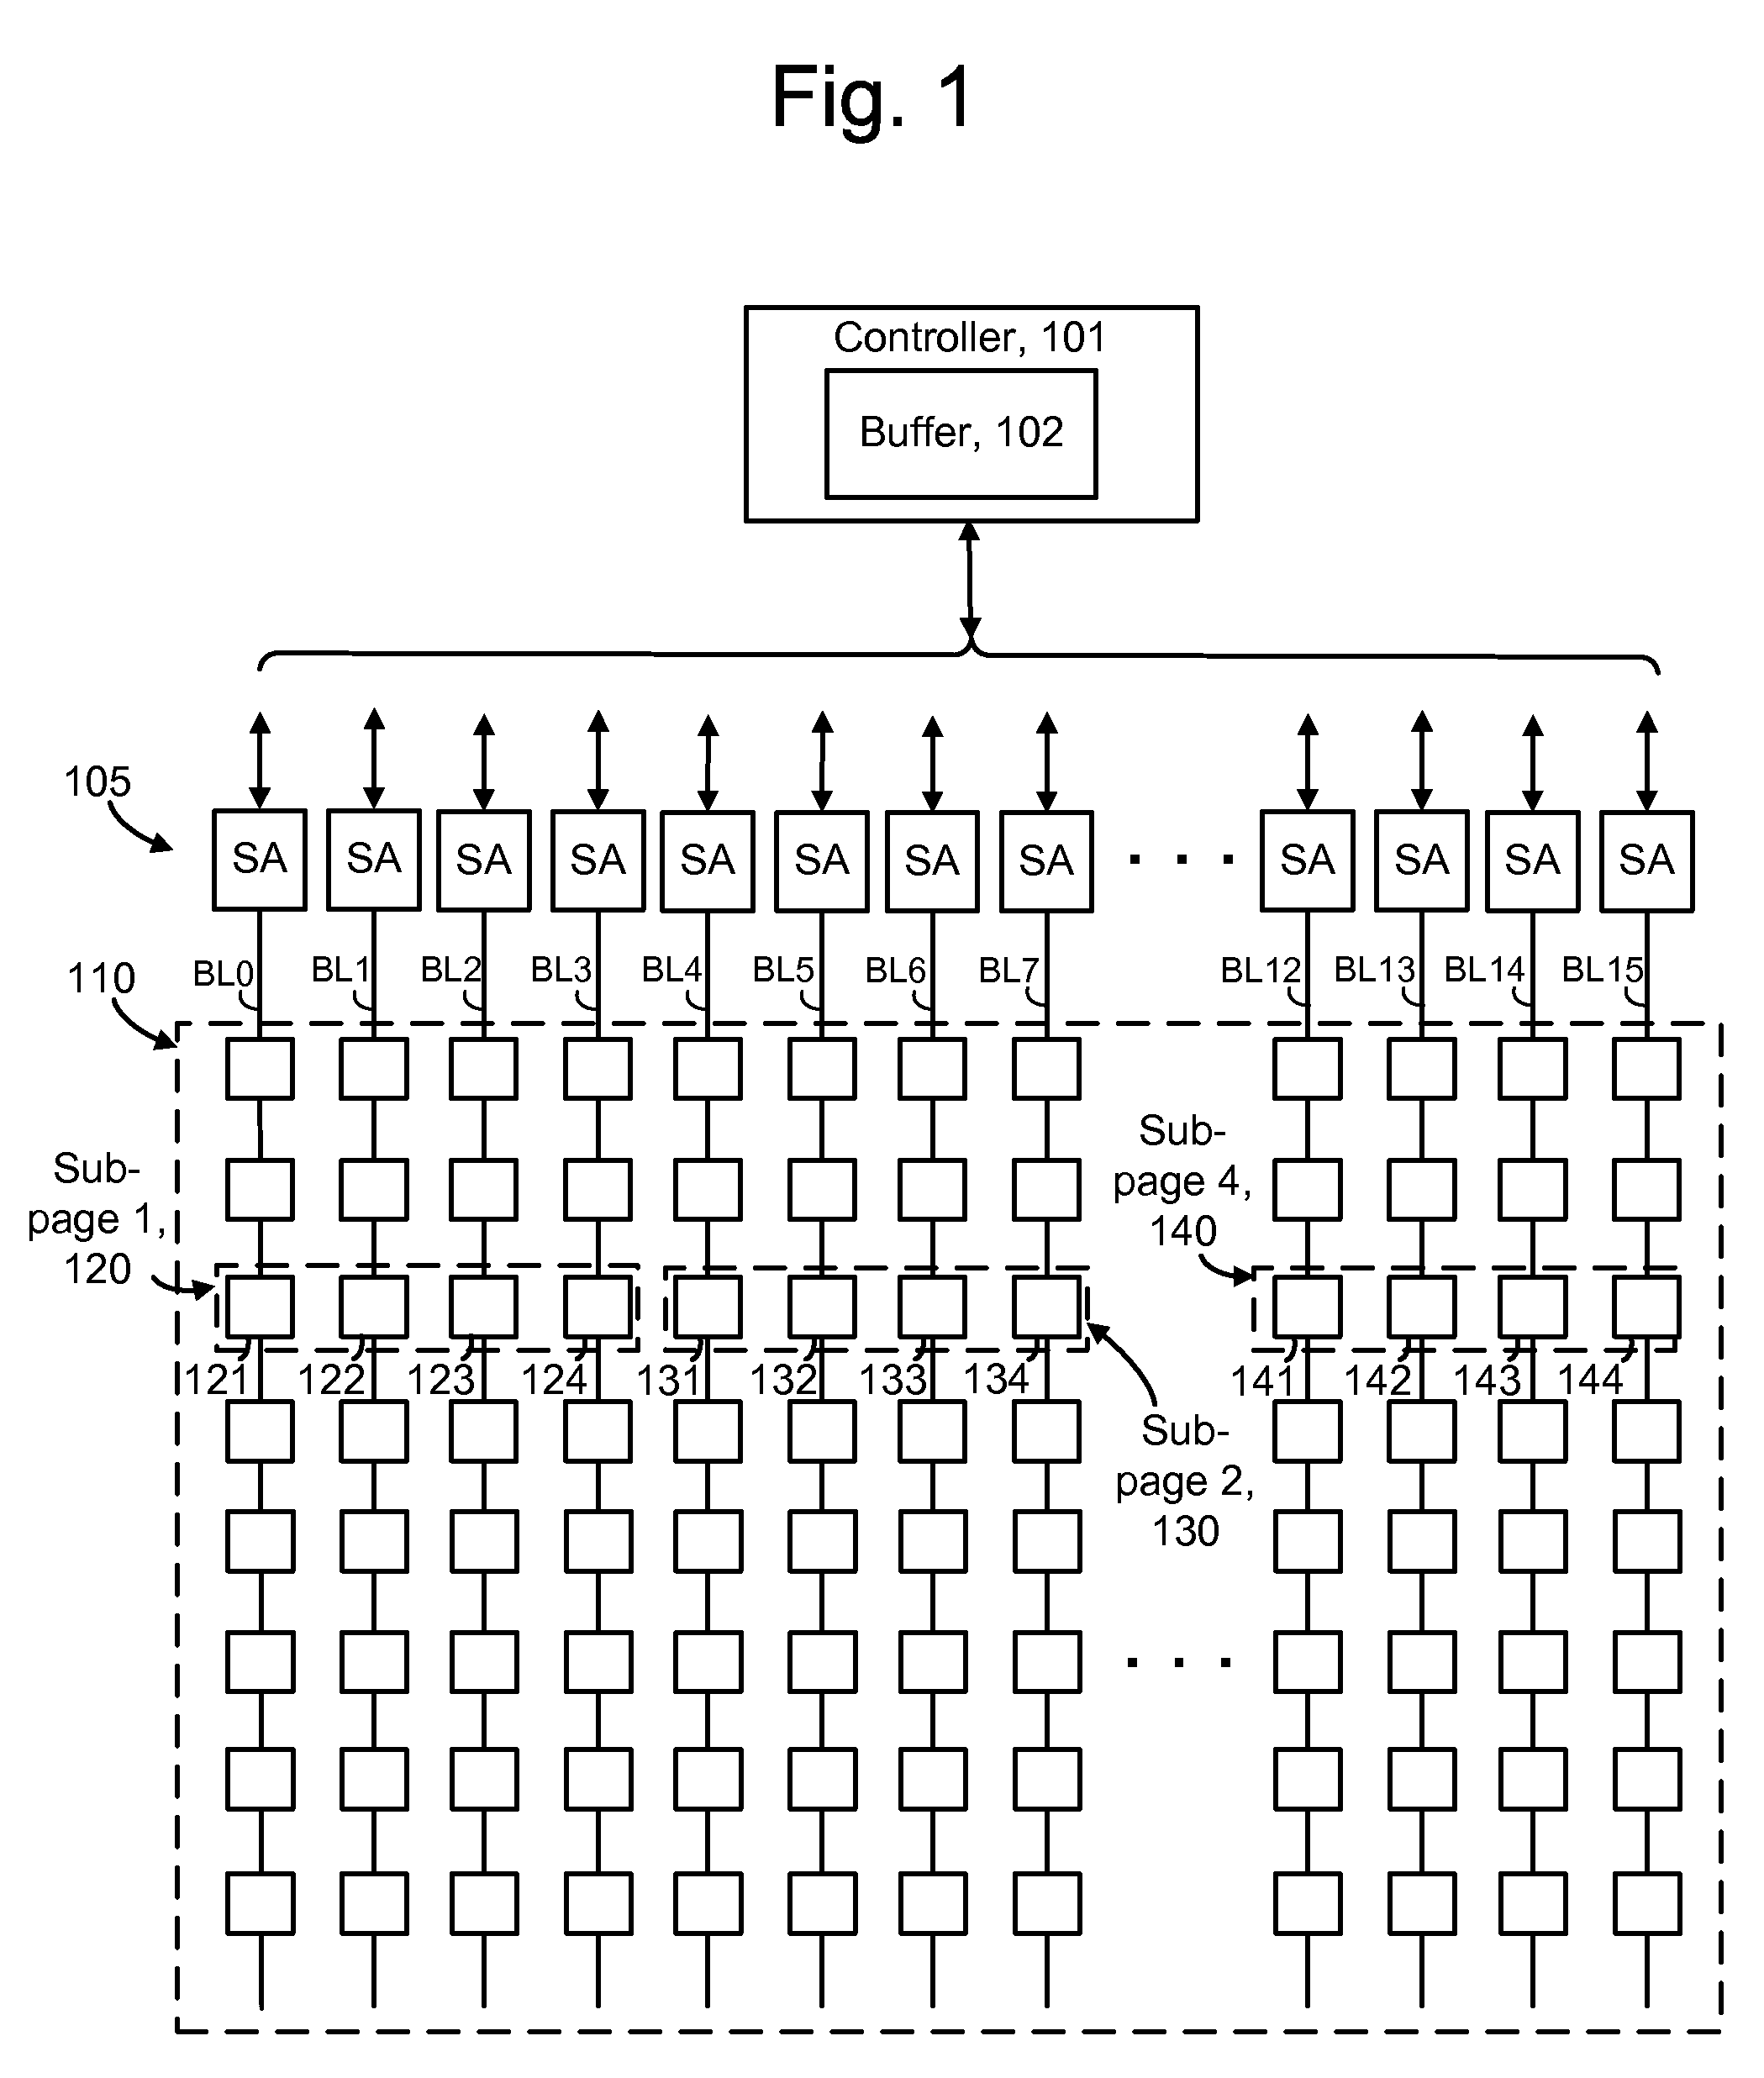 Adjustable read latency for memory device in page-mode access